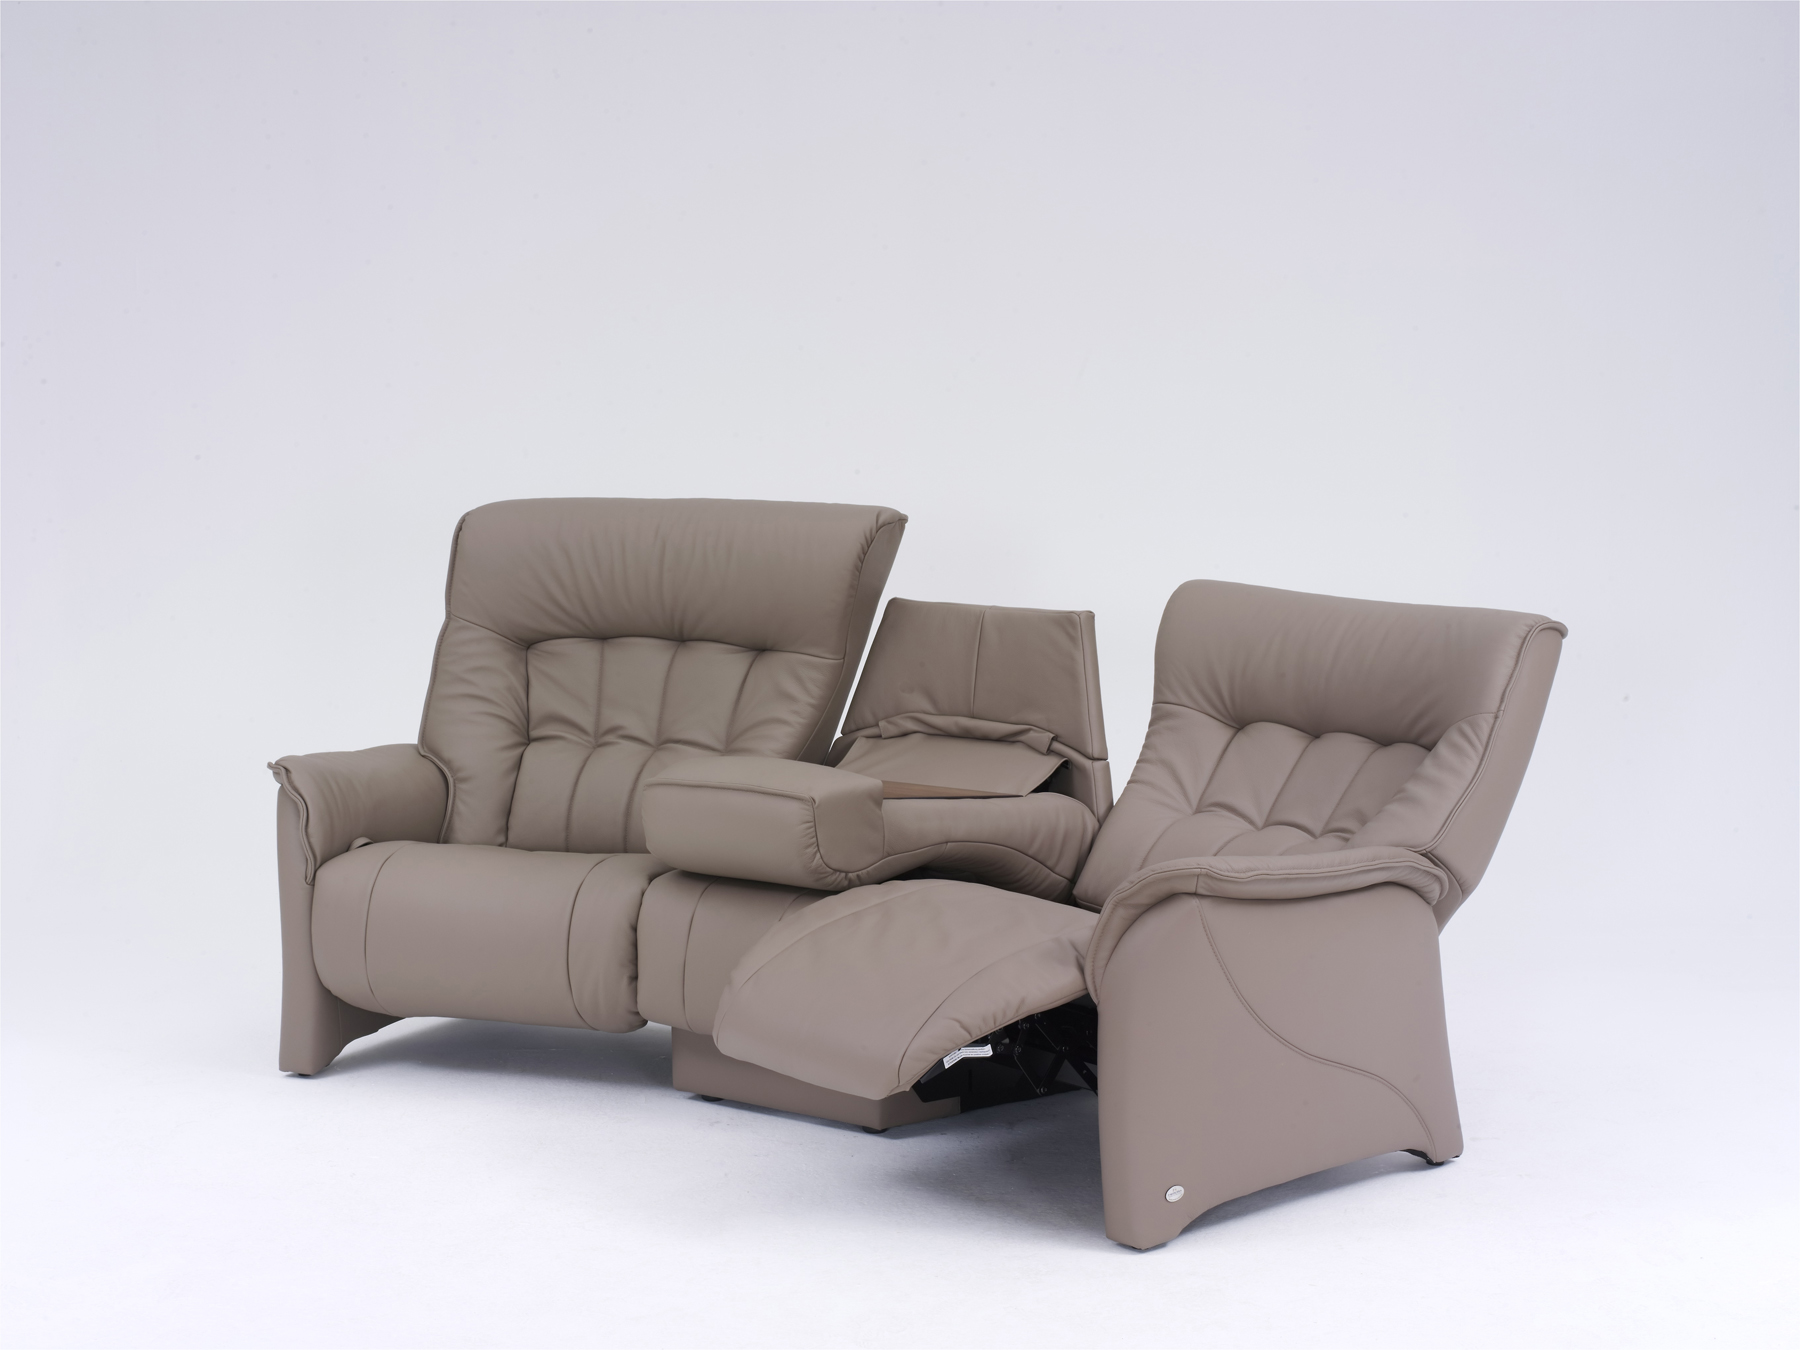 HIMOLLA RHINE SOFA ONE SEAT RECLINED MIDDLE SEAT ADJUSTED